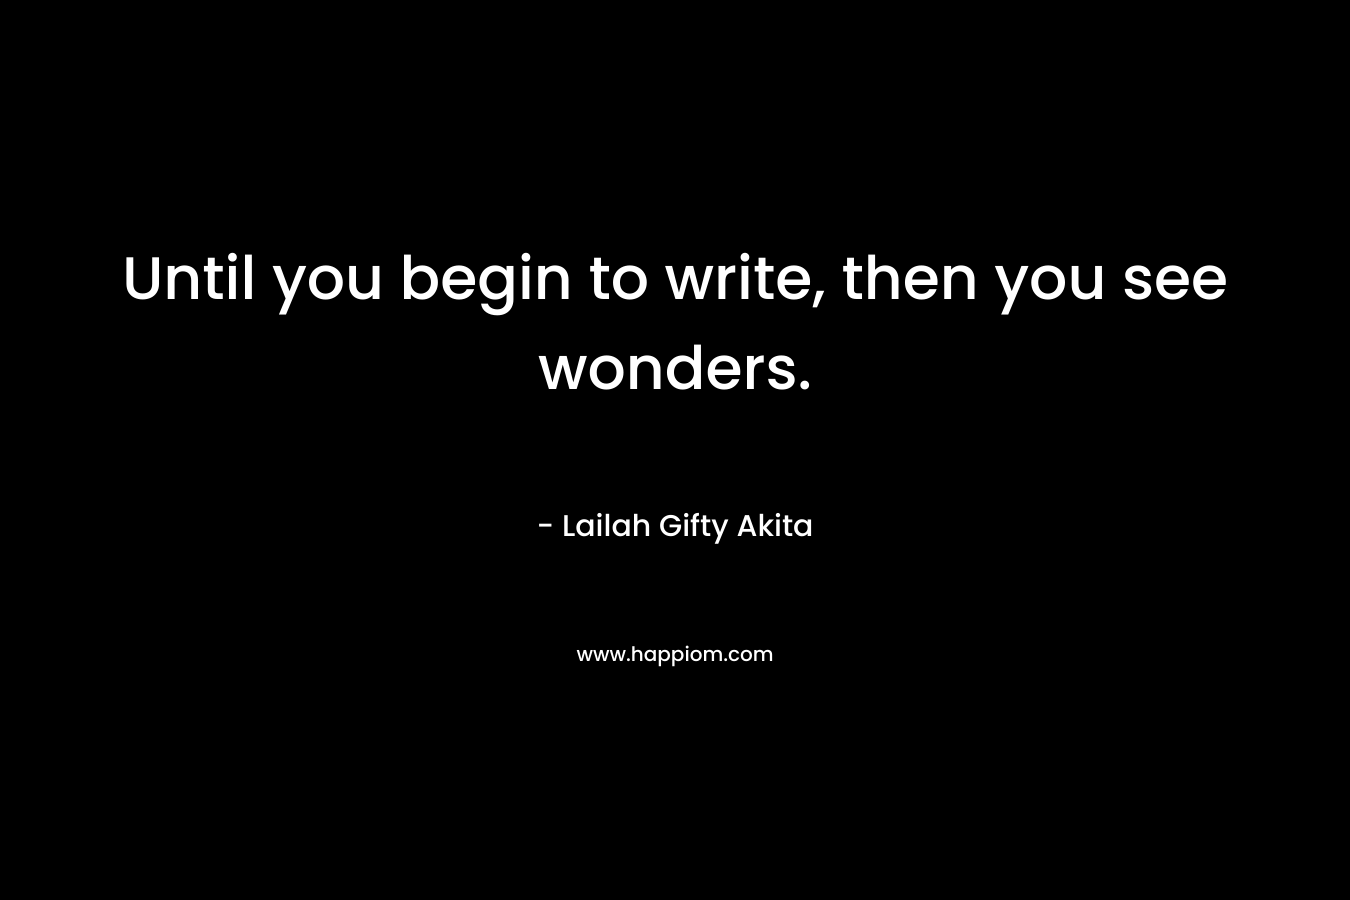 Until you begin to write, then you see wonders.